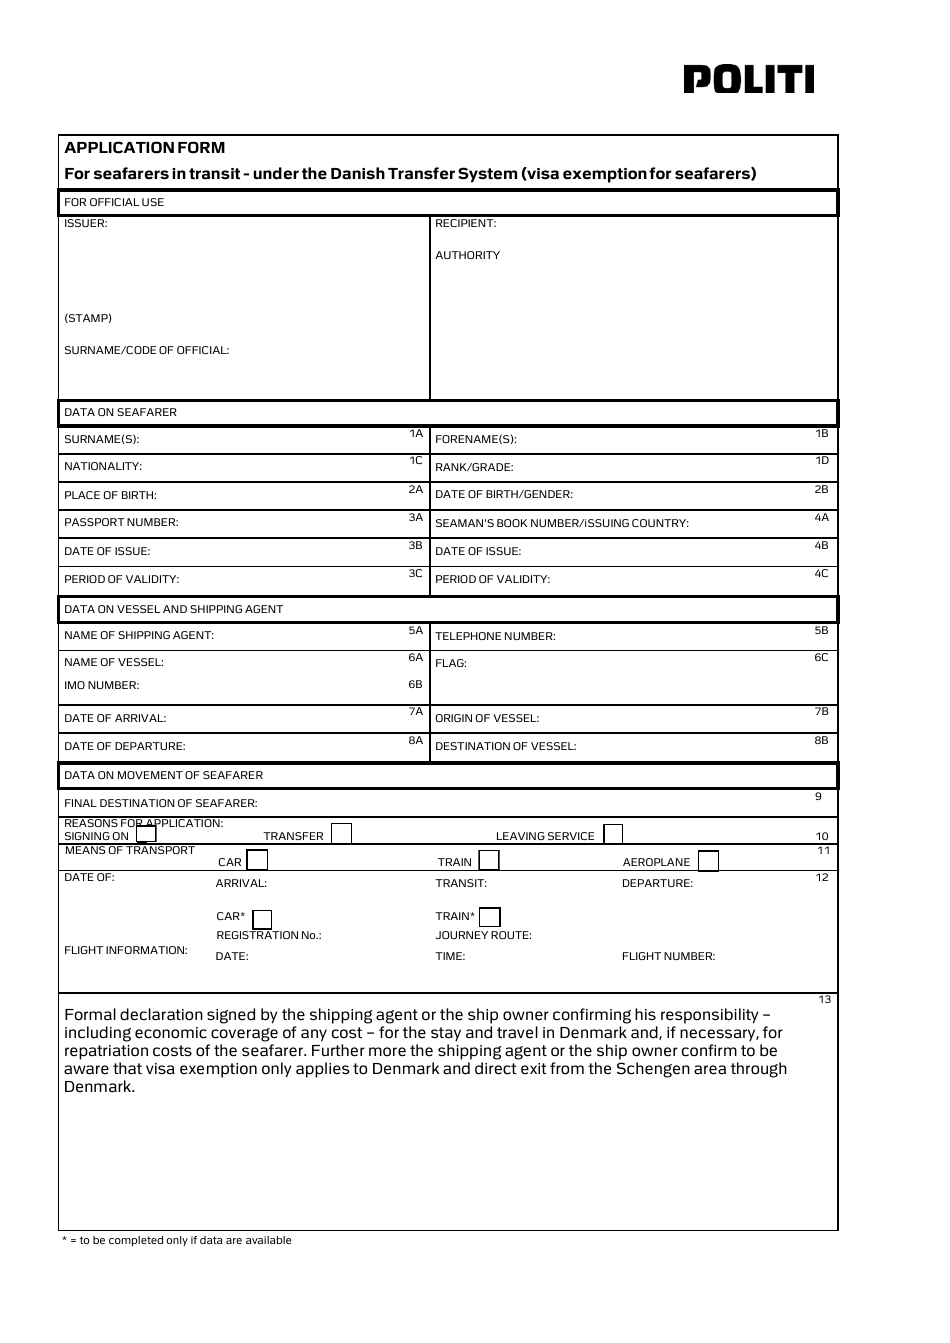 Denmark Application Form - for Seafarers in Transit - Under the Danish